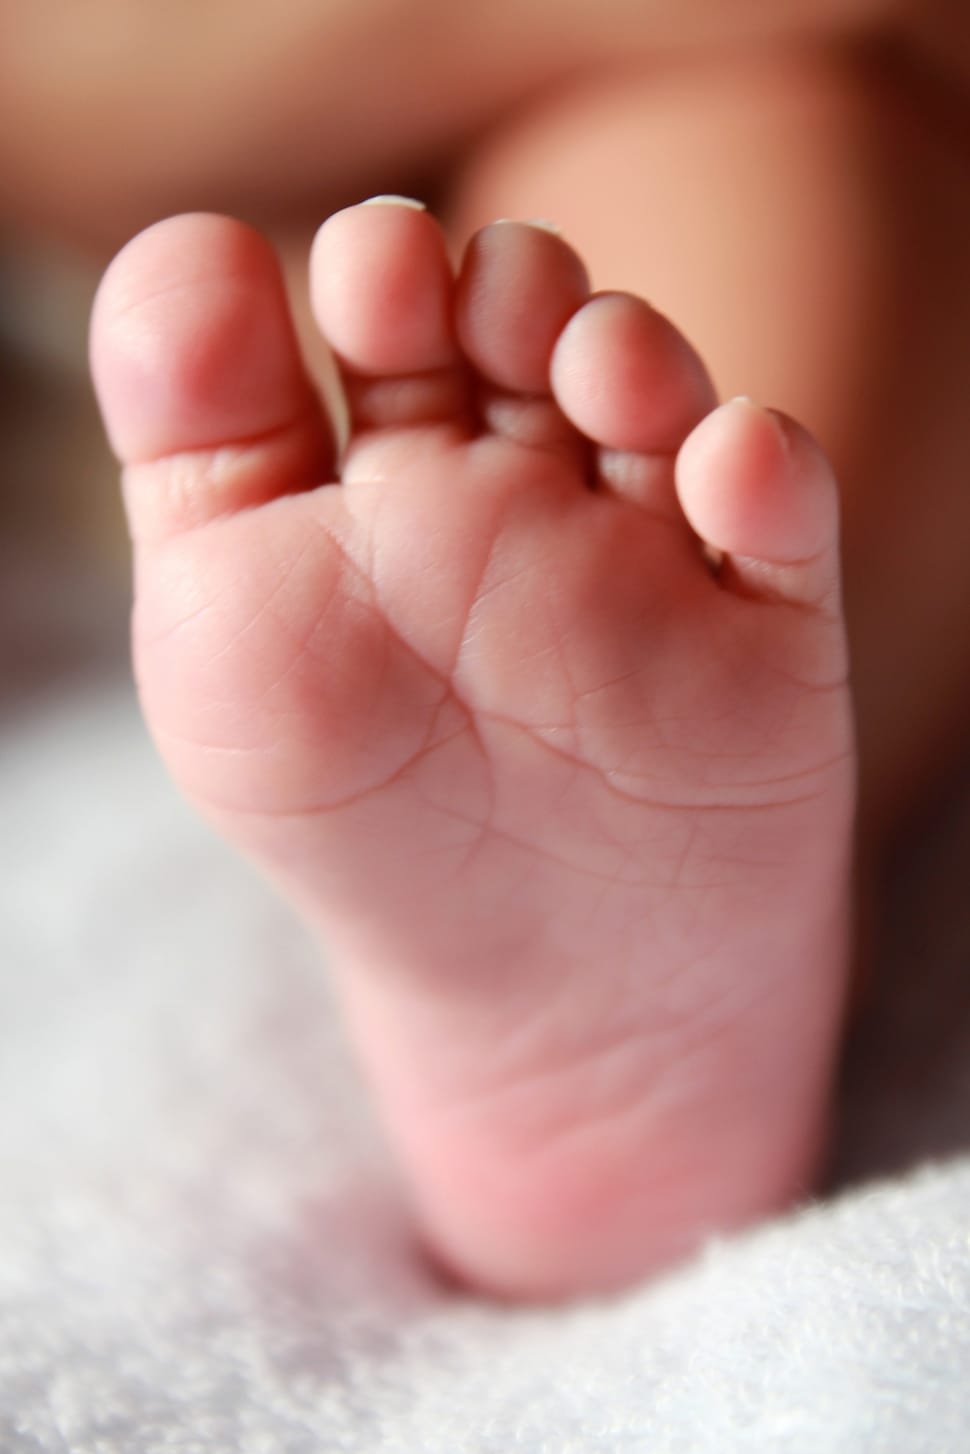 Newborn, Baby Foot, Baby, Leg, Child, baby, human foot preview